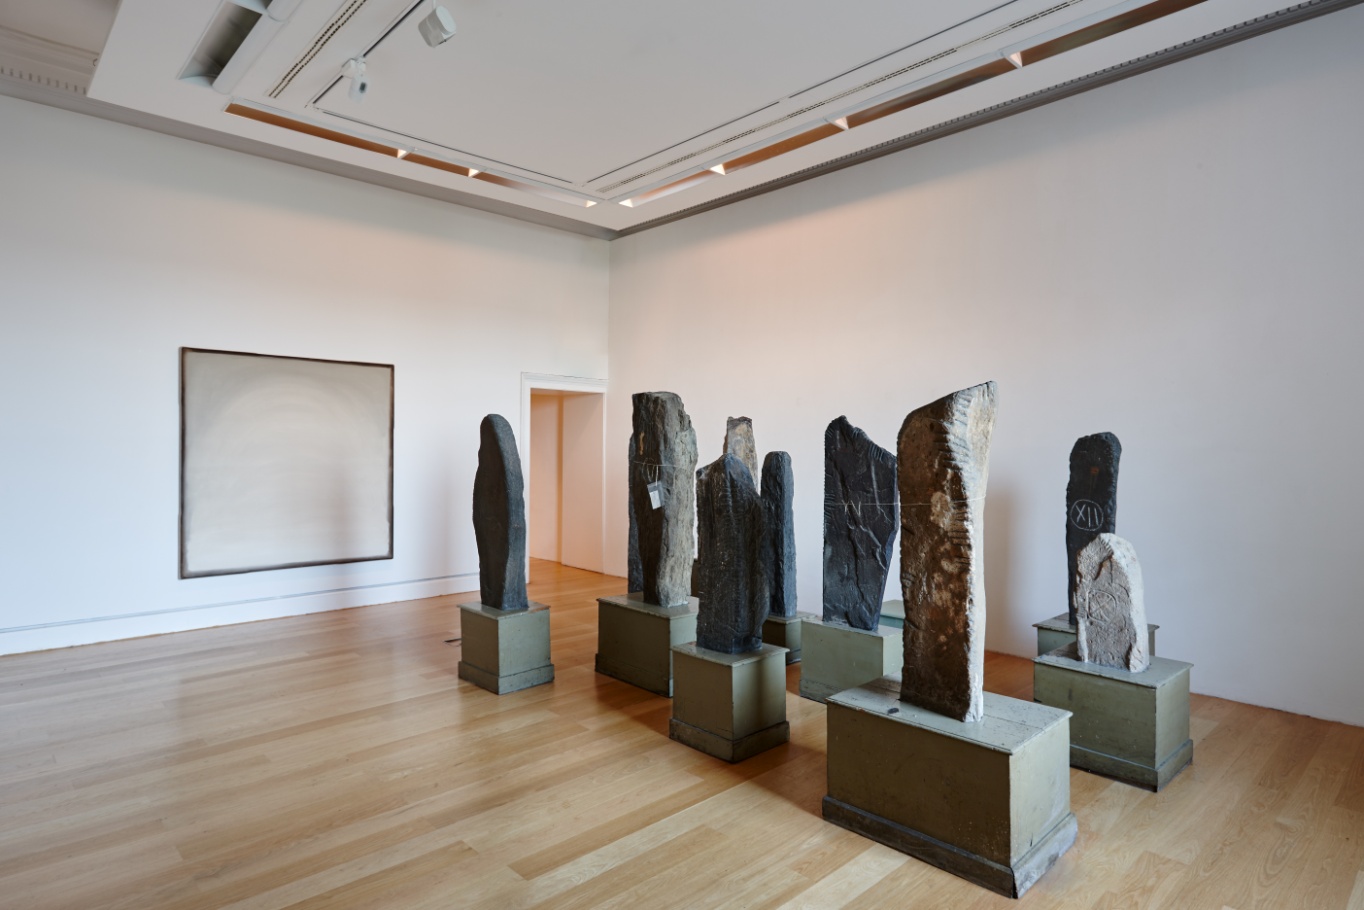 Hope Painting (Going Through the Loooking Glass), 2005 (IMMA) by William McKeown with a selection of Ogham Stones , 5th-7th AD (NMI) Denis Mortell Photography